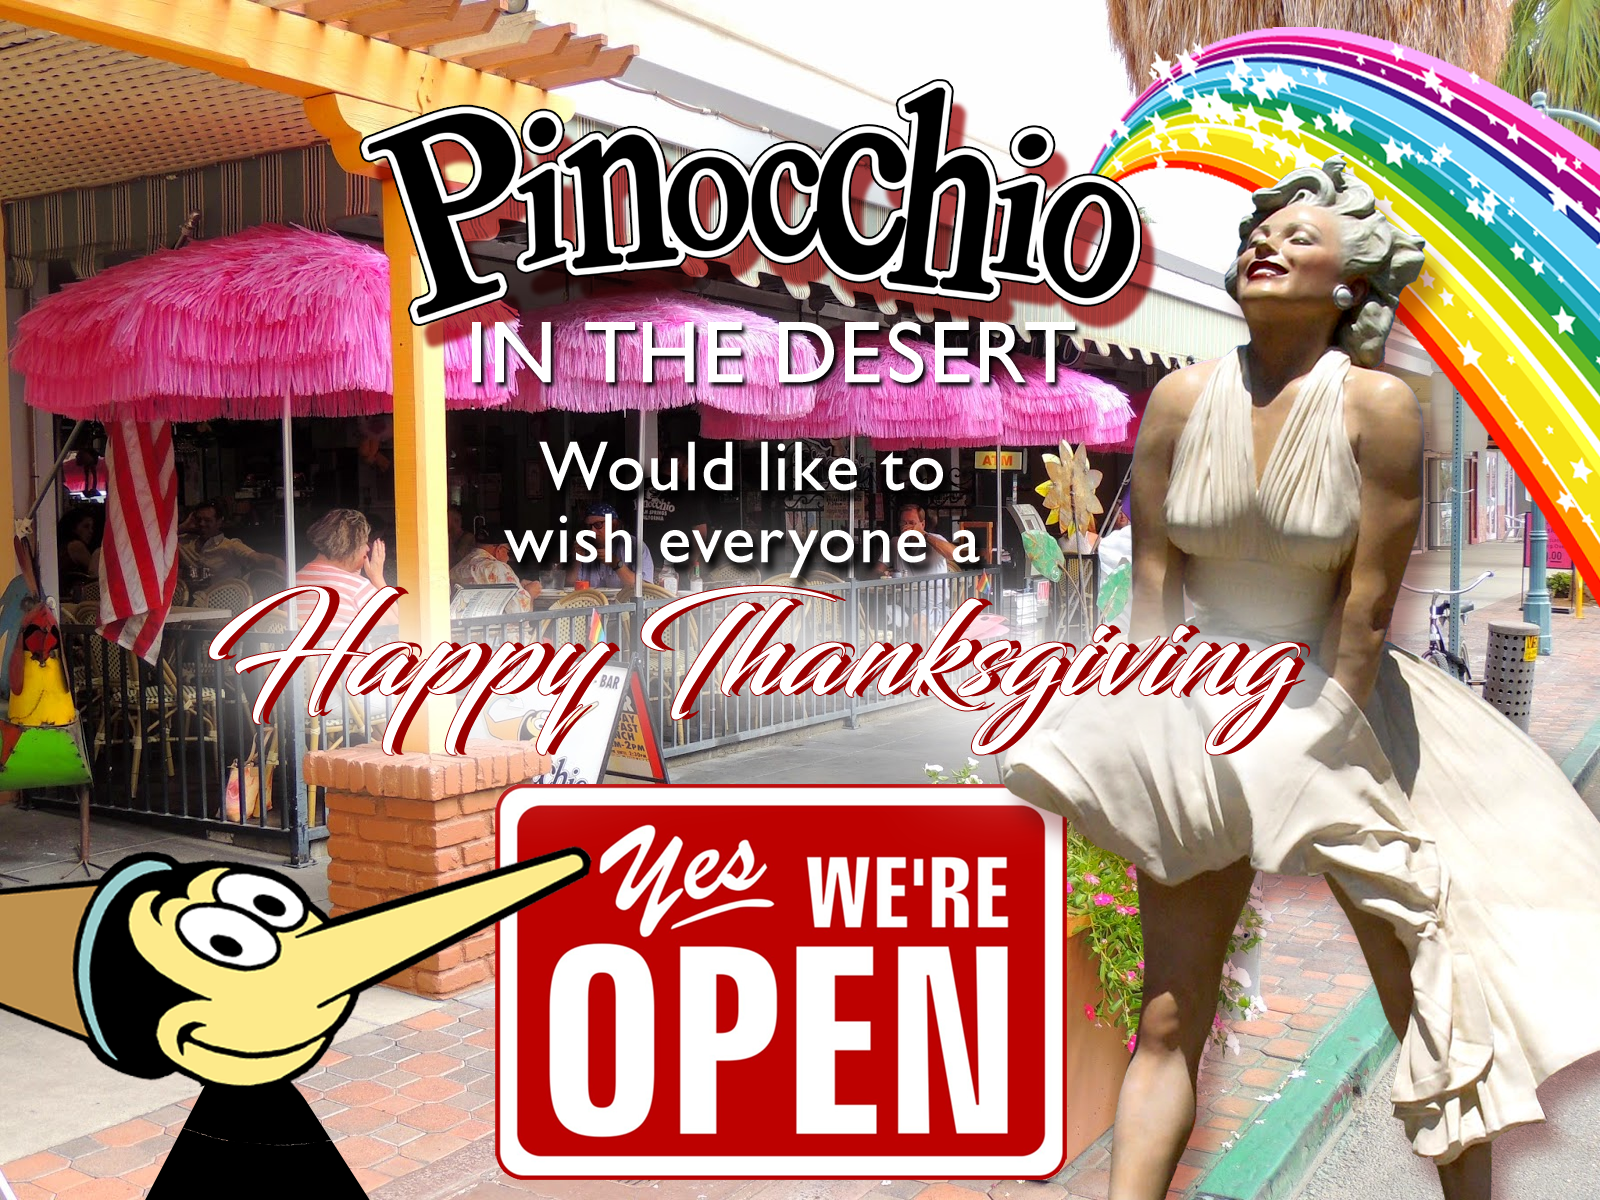 Happy Thanksgiving from everyone at PINOCCHIO'S